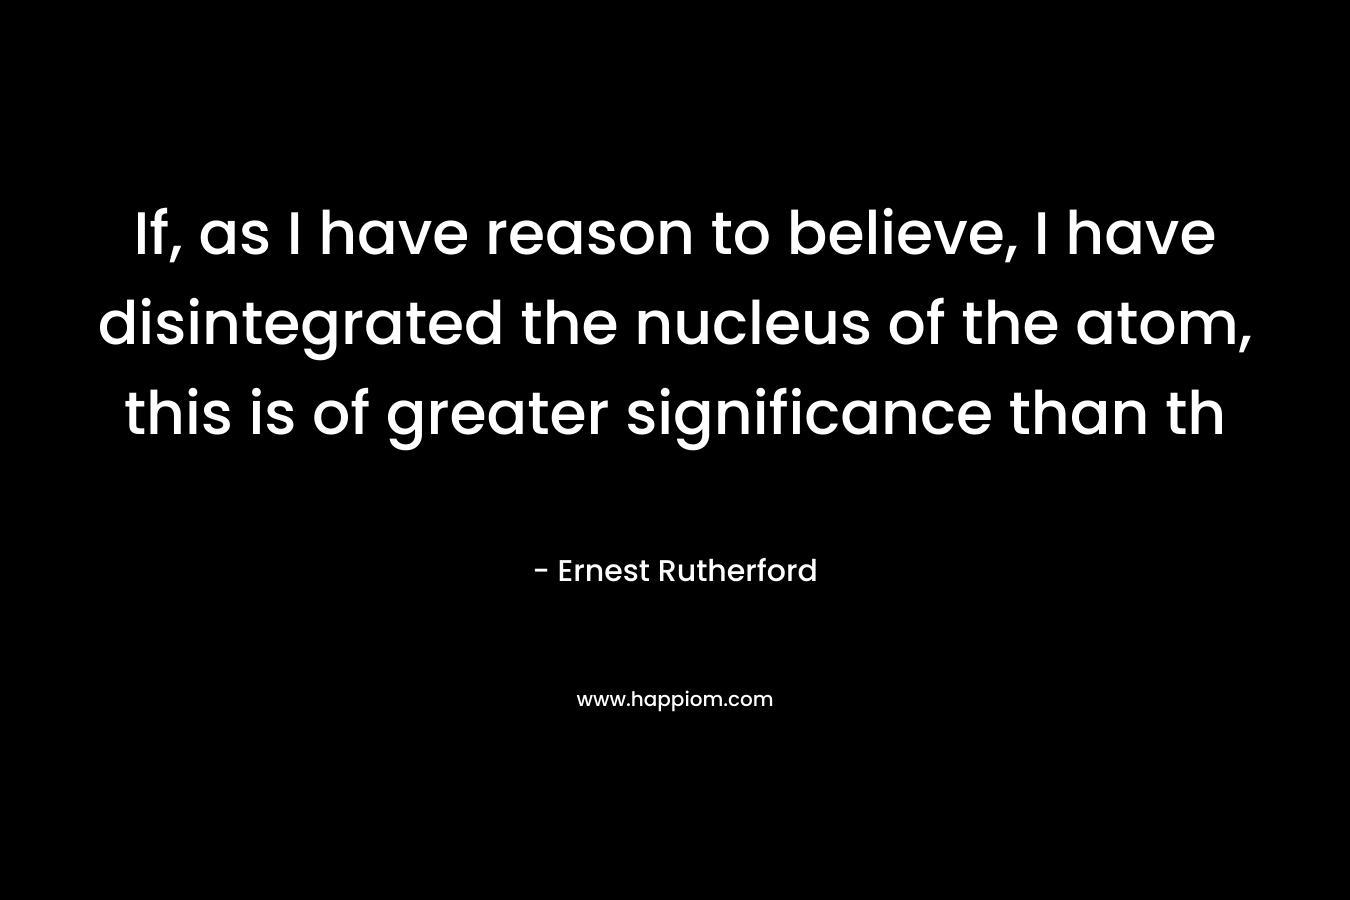 If, as I have reason to believe, I have disintegrated the nucleus of the atom, this is of greater significance than th – Ernest Rutherford